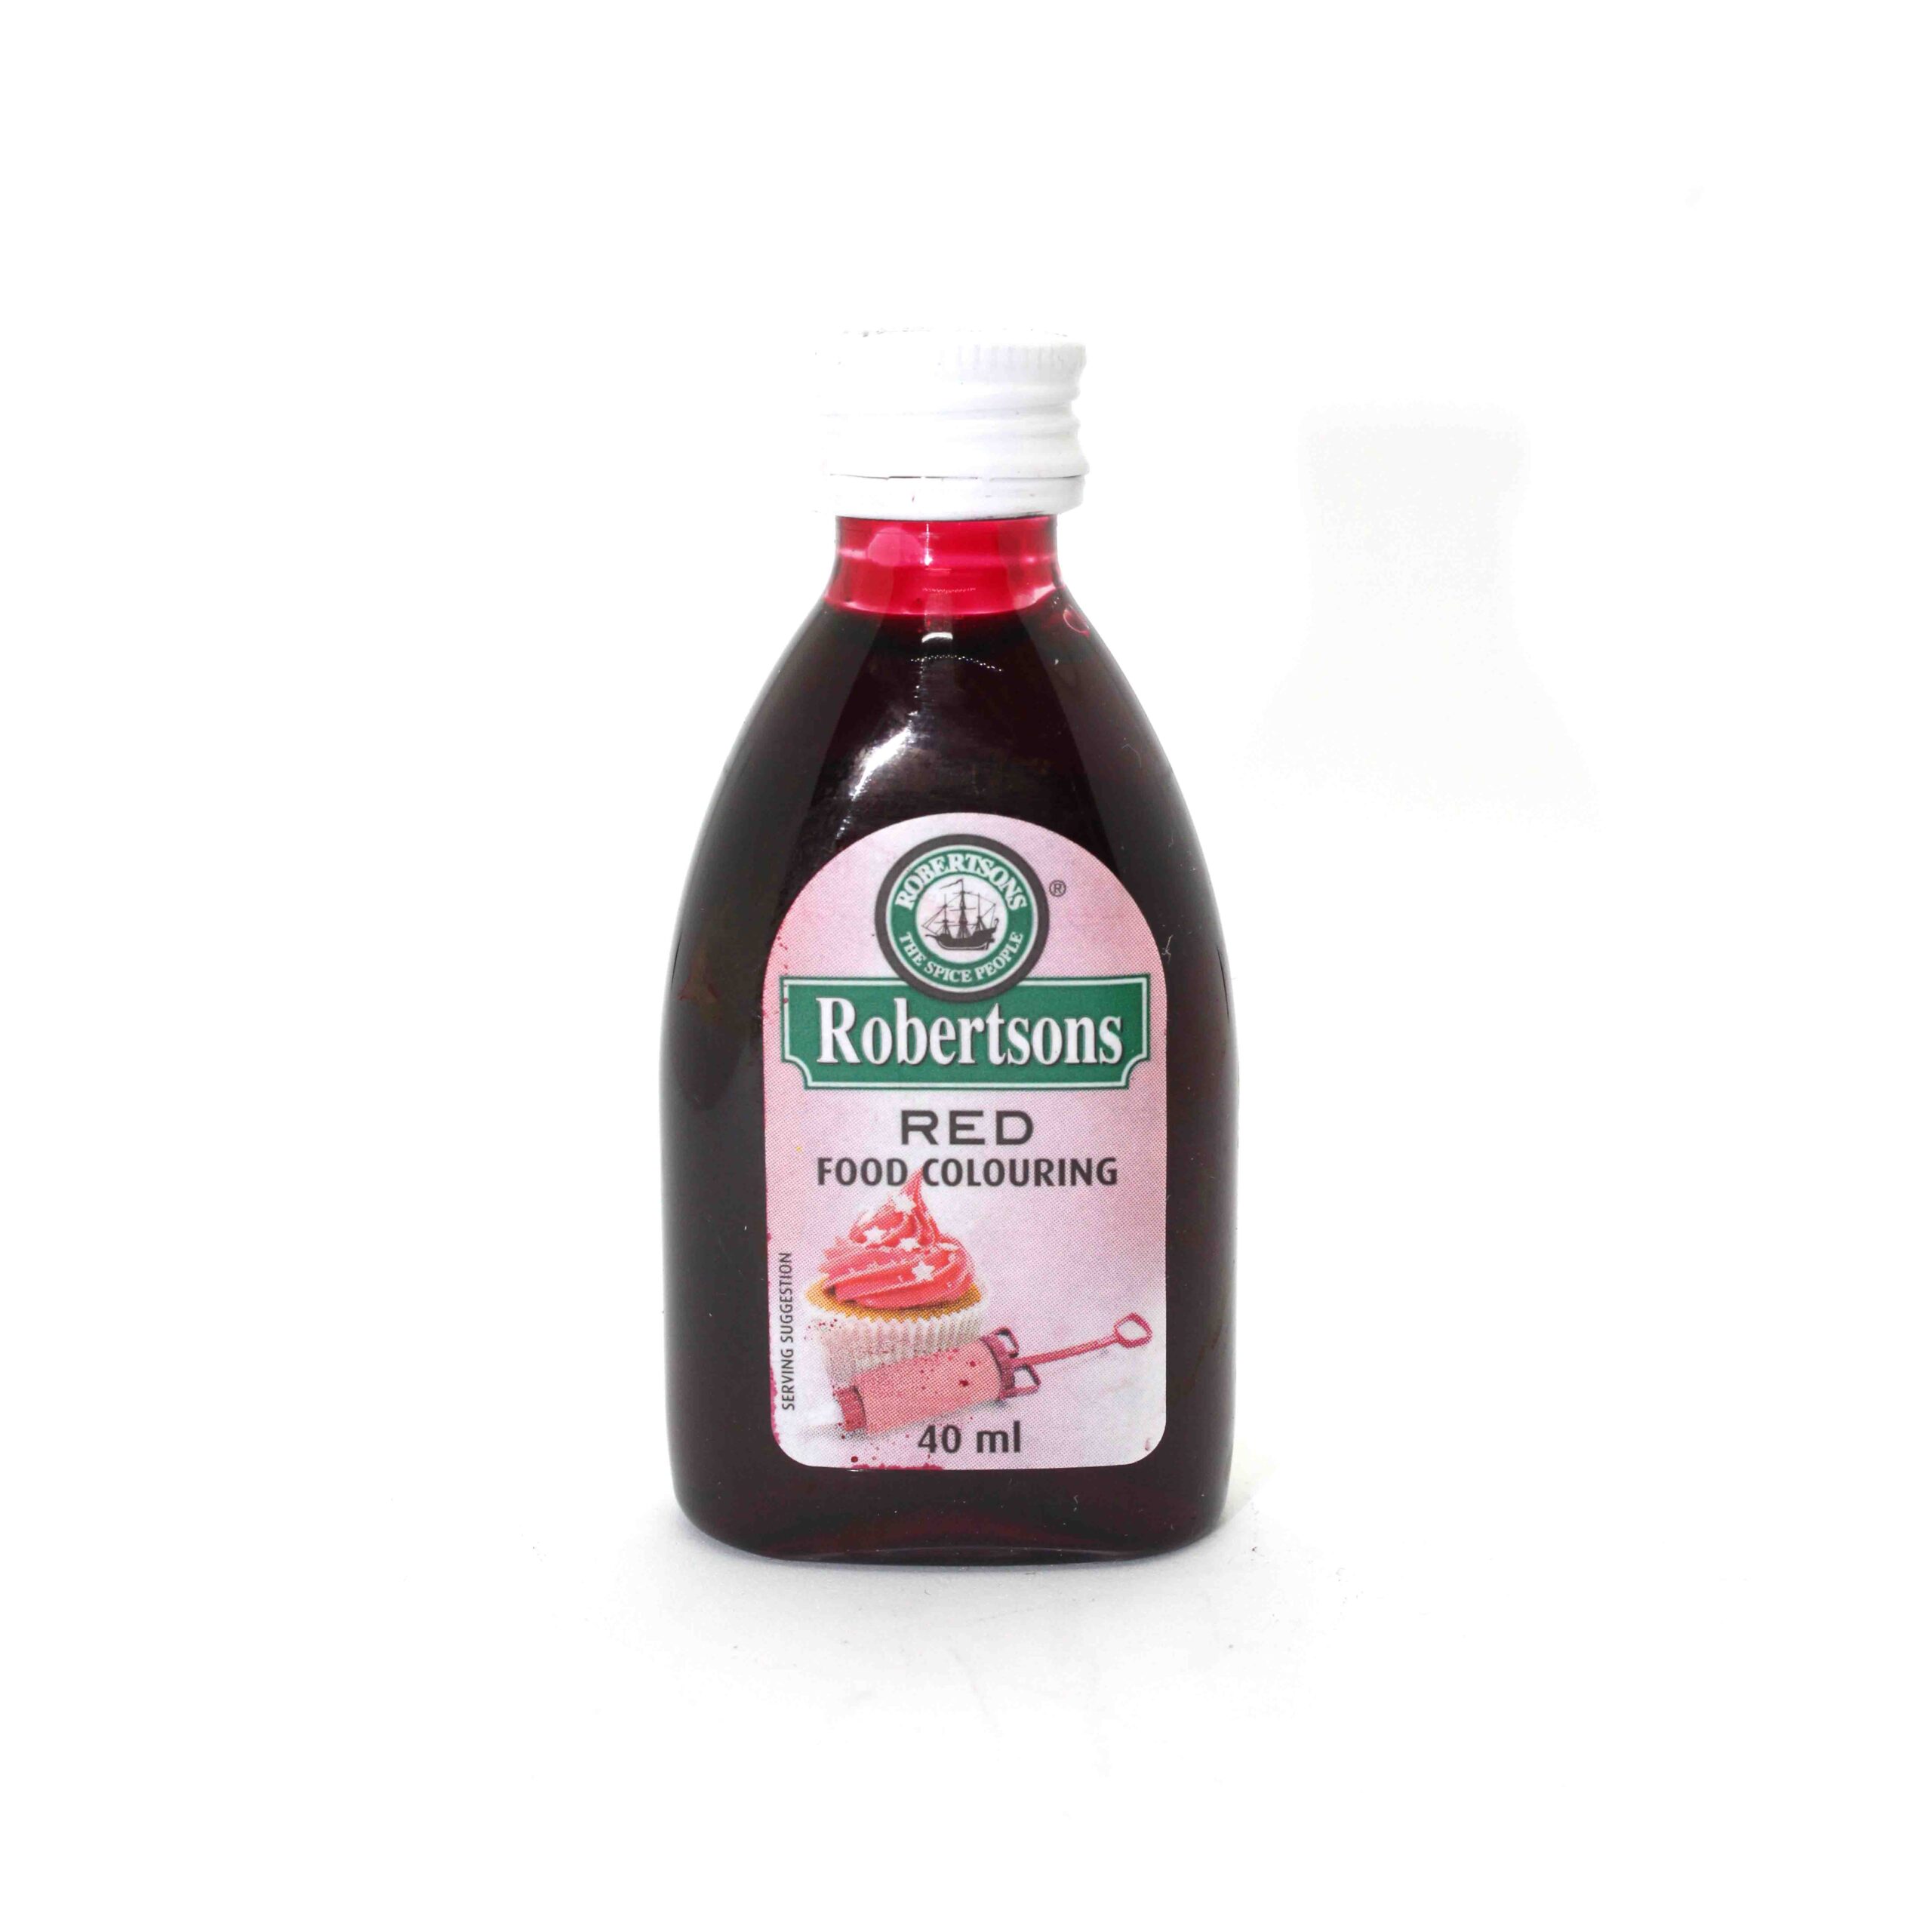 ROBERTSONS
FOOD COLOURING
RED 40ml